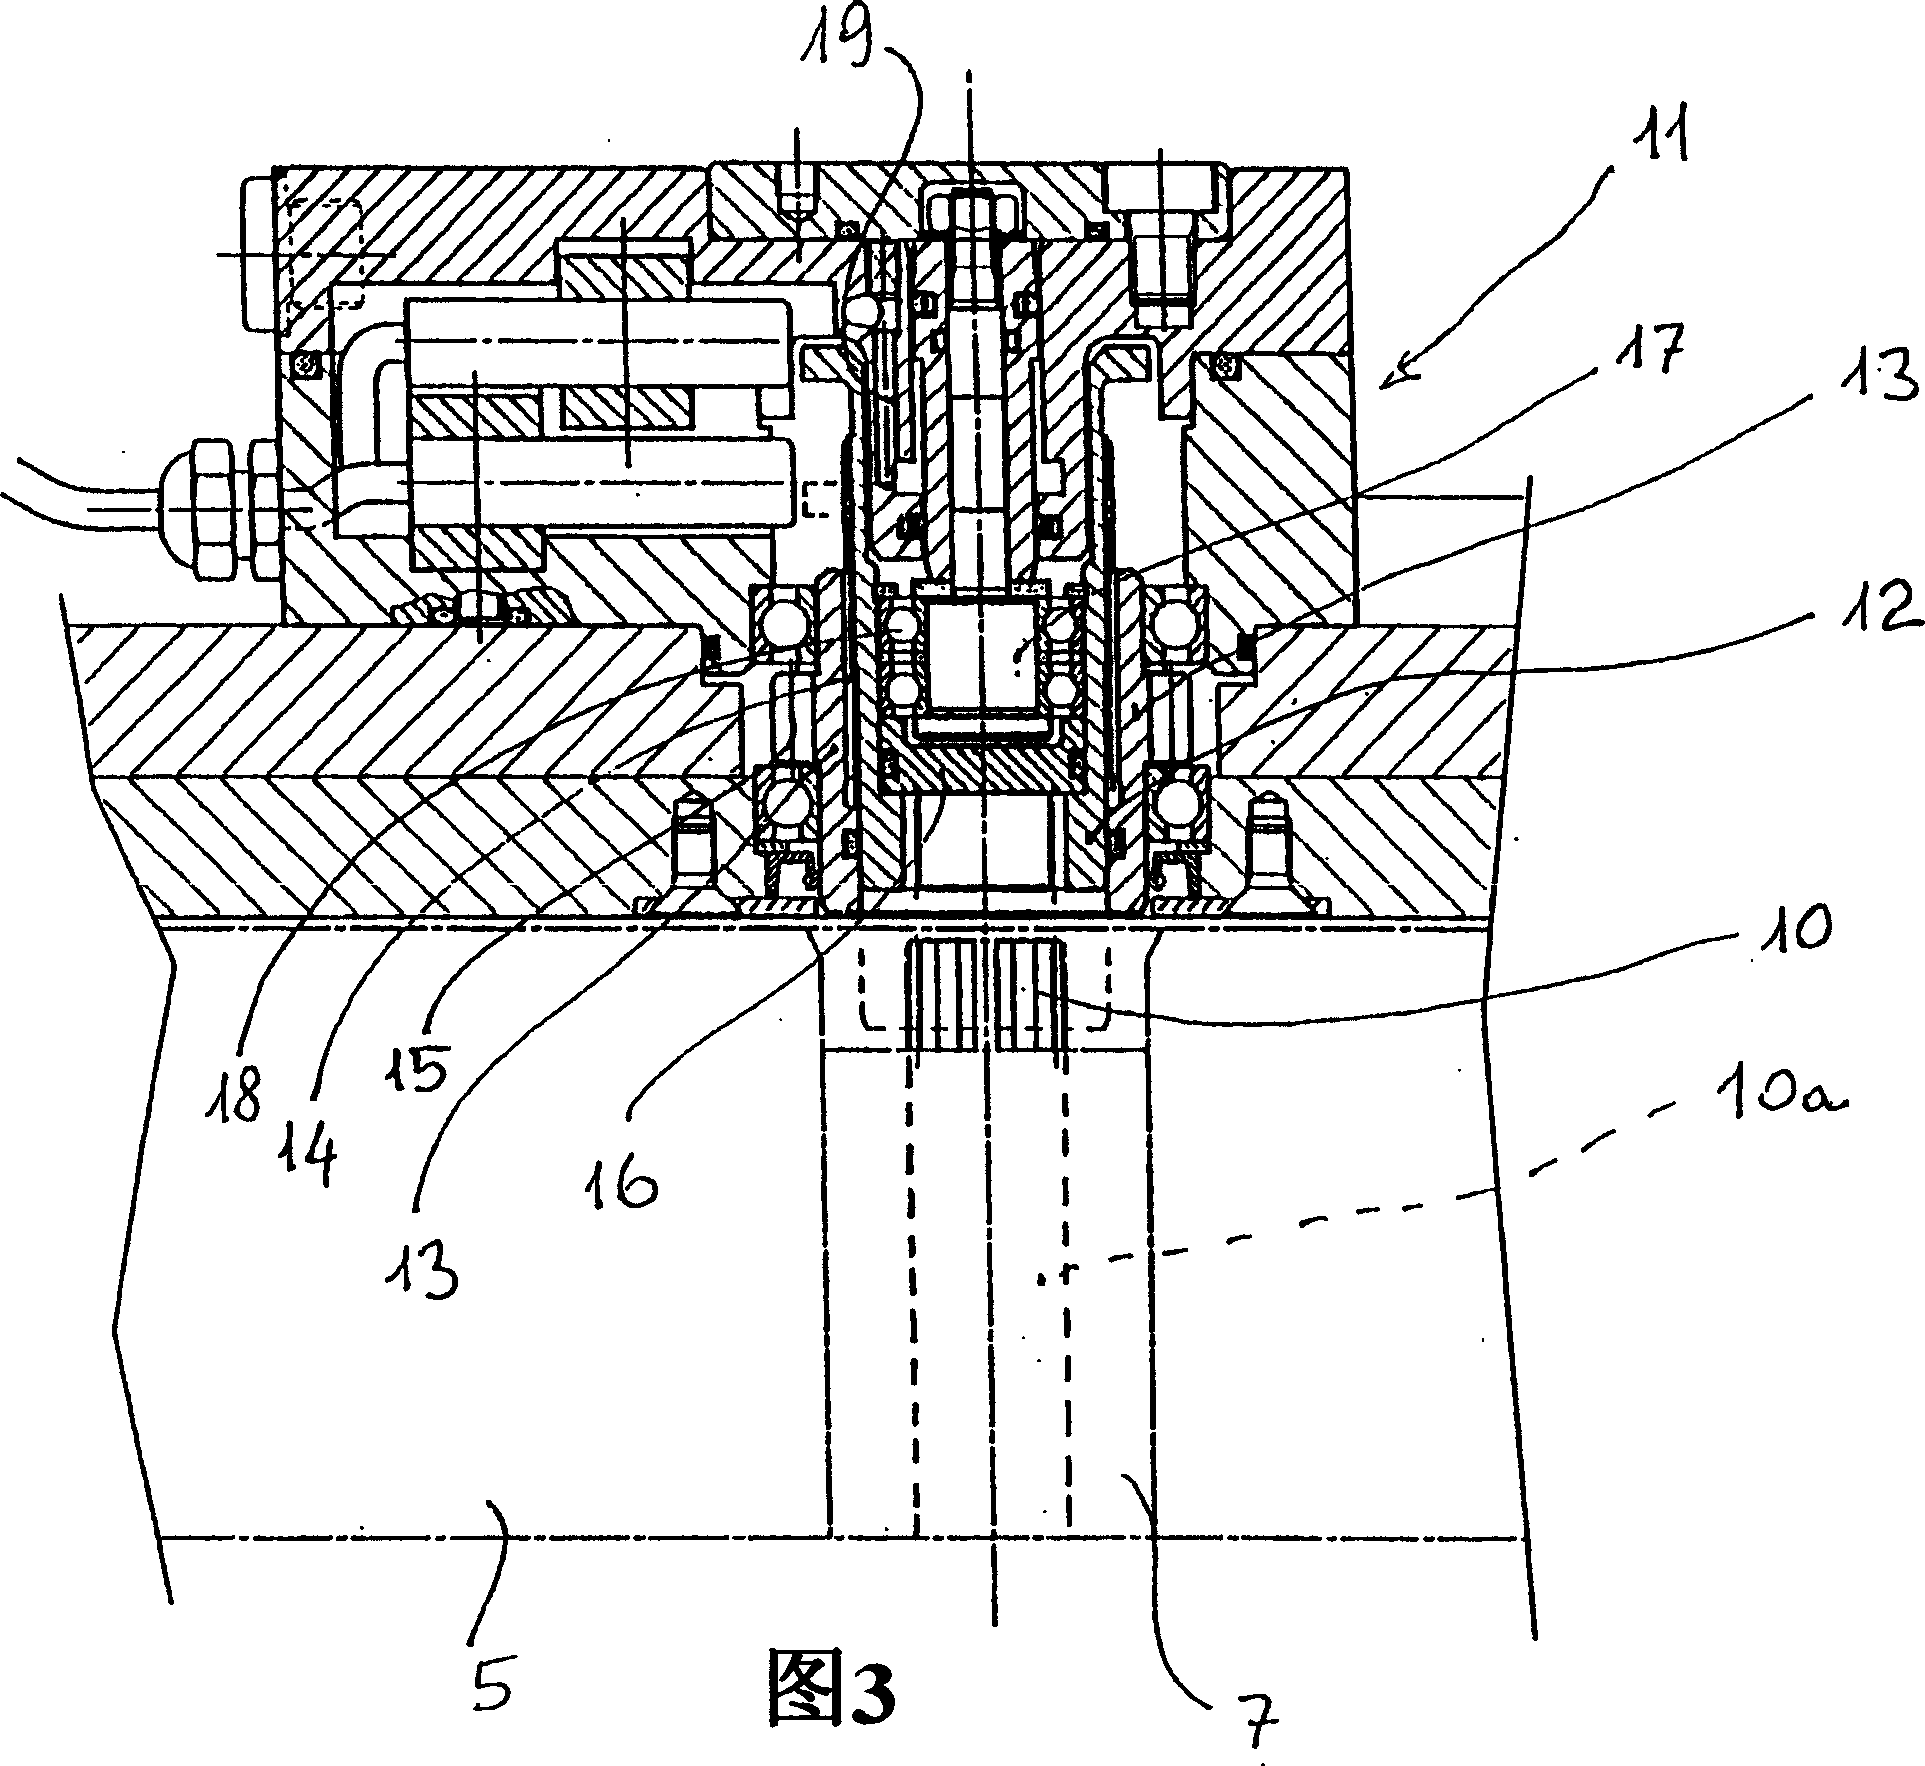 Driving system for rotary tools in a tool holder turret